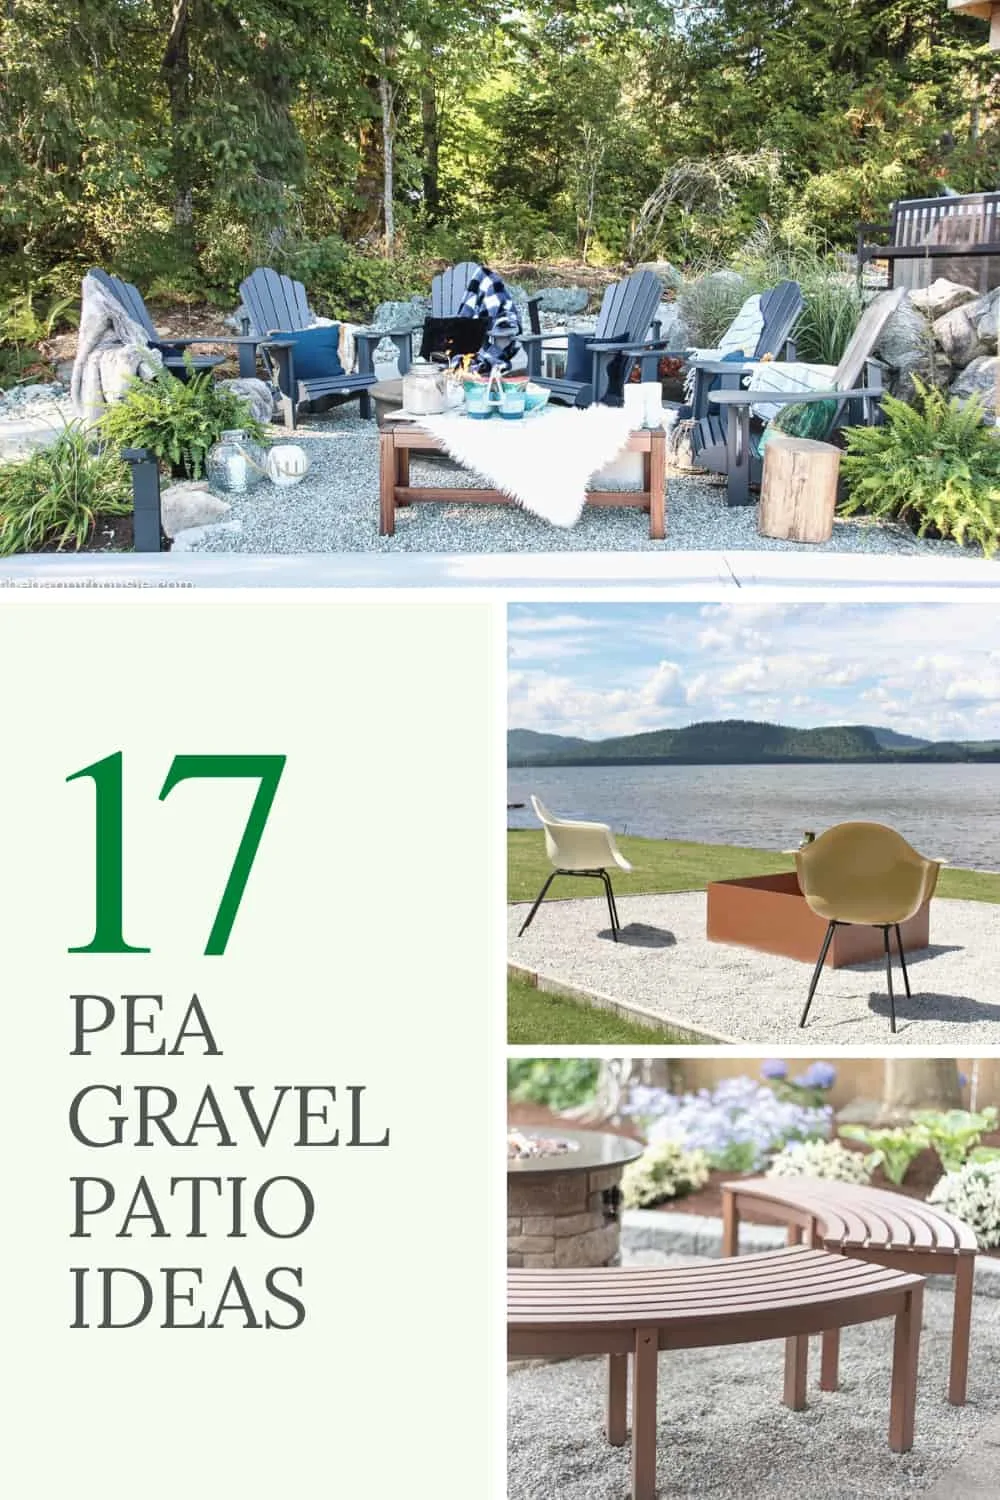 18 Pea Gravel Patio Ideas for Your Yard   The Handyman's Daughter